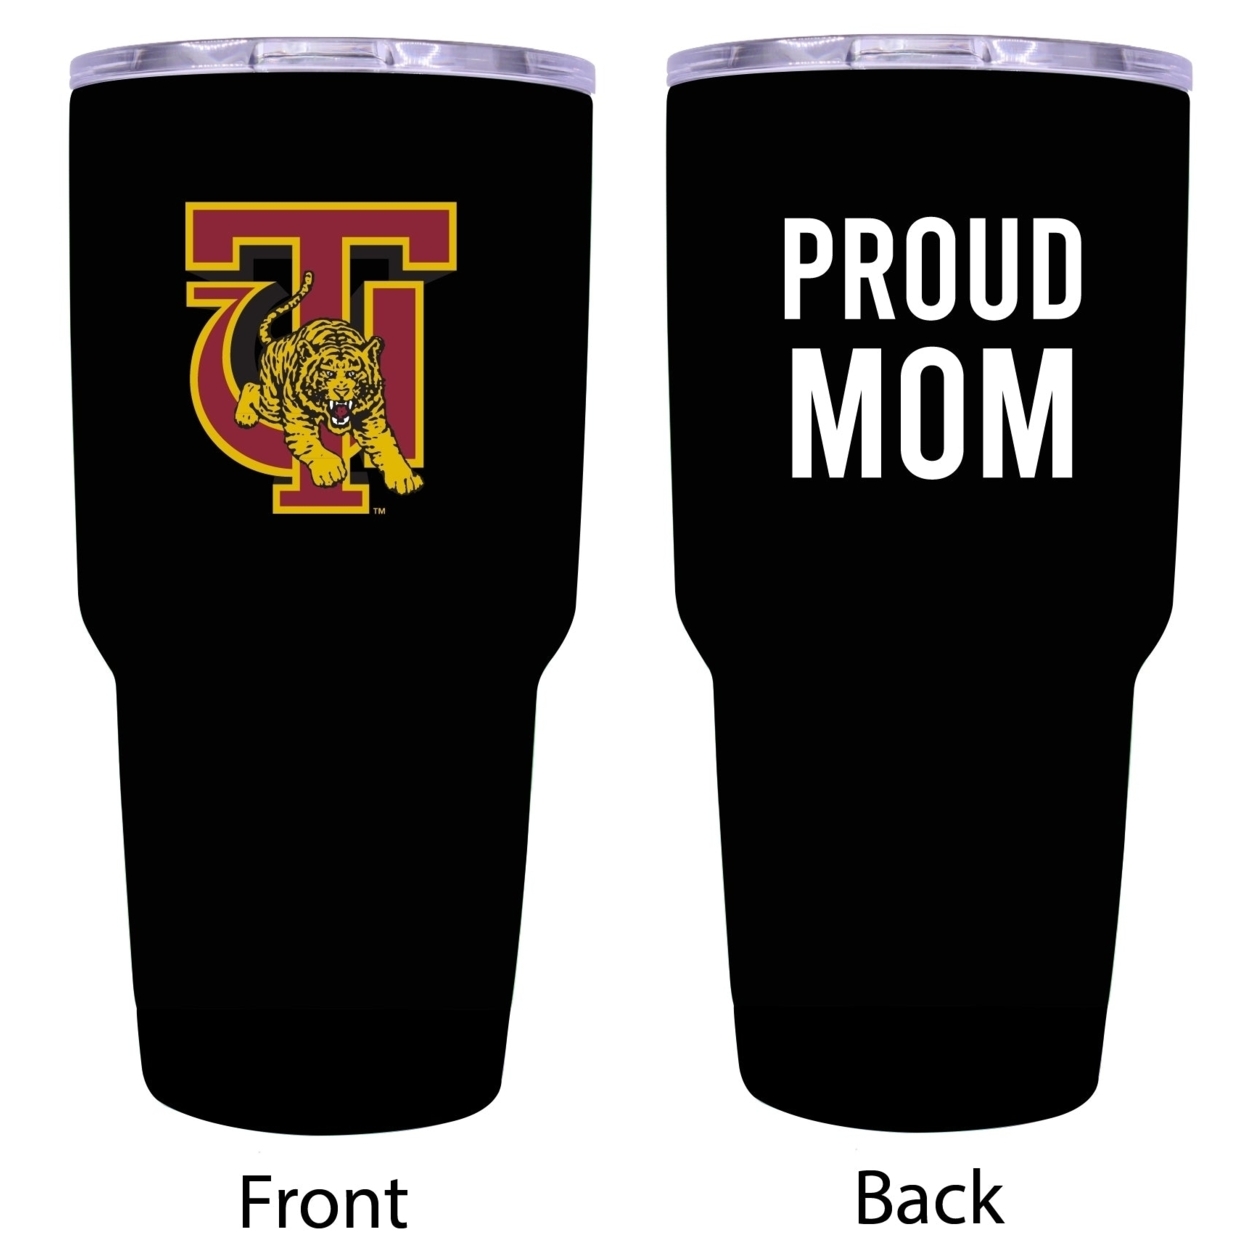 Tuskegee University Proud Mom 24 Oz Insulated Stainless Steel Tumblers Choose Your Color. - Black